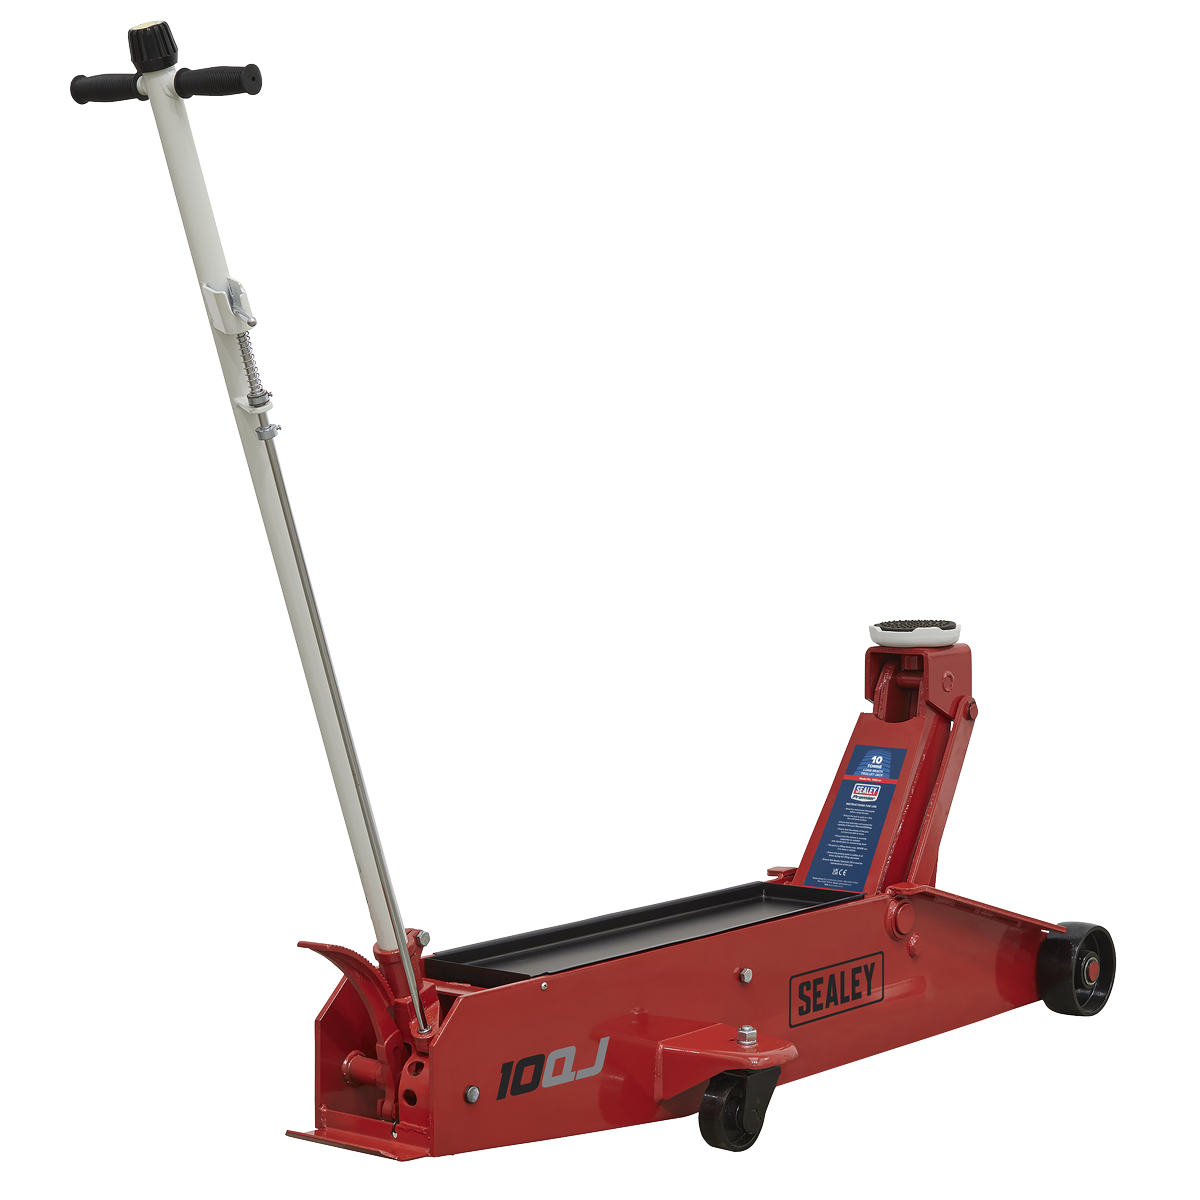 Sealey trolley jack with large saddle for easy lifting 10QJ